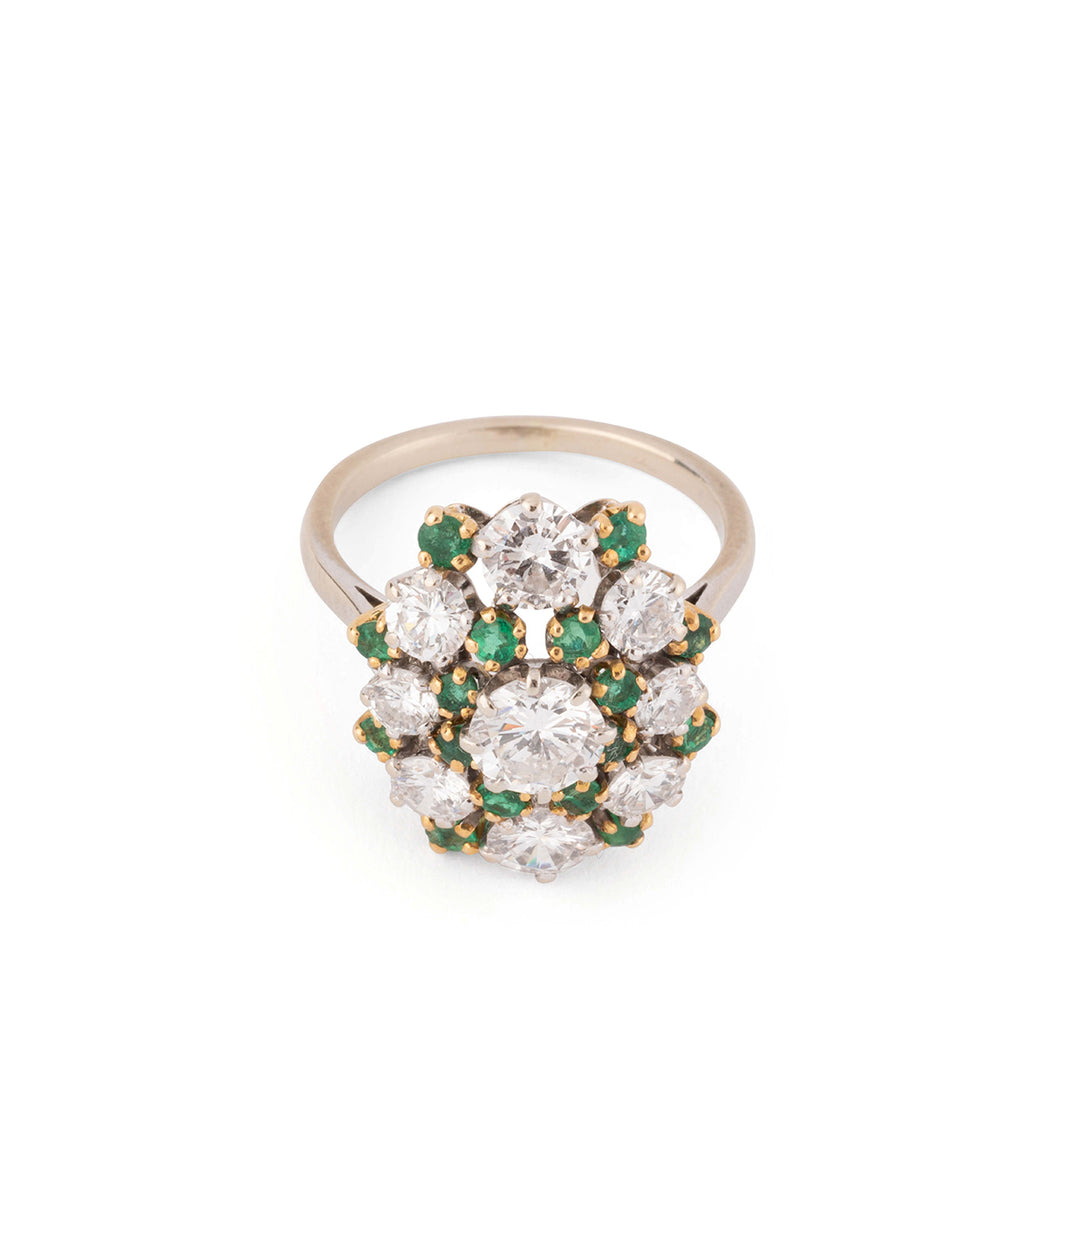 Vintage ring diamonds and emeralds "Dagny" - Caillou Paris